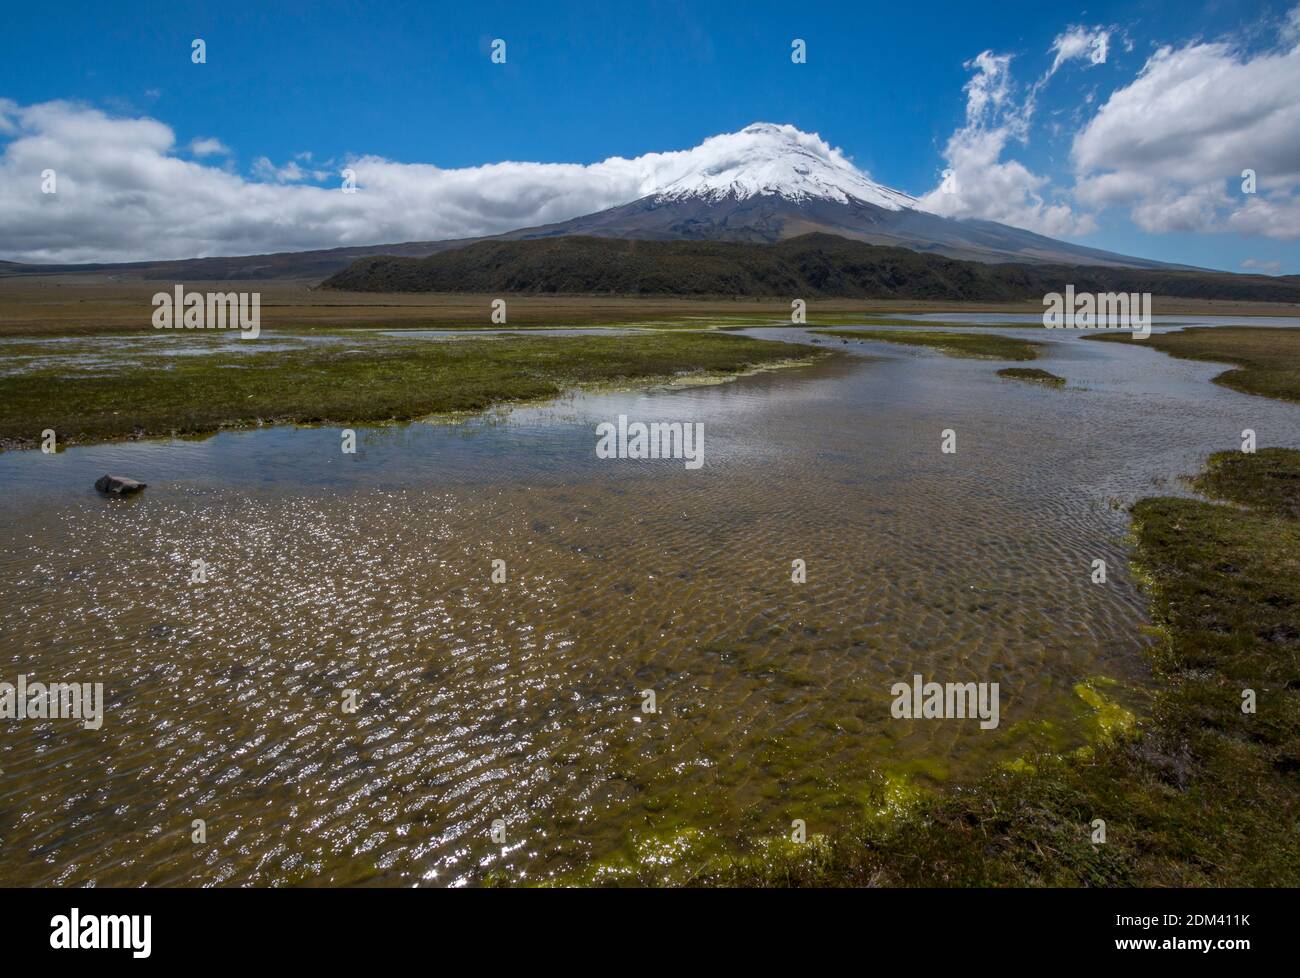 The snowcapped Cotopaxi Volcano with a lake  (Laguna Limpiopungo) in foreground. Cotopaxi National Park in the Ecuadorian Andes. Stock Photo